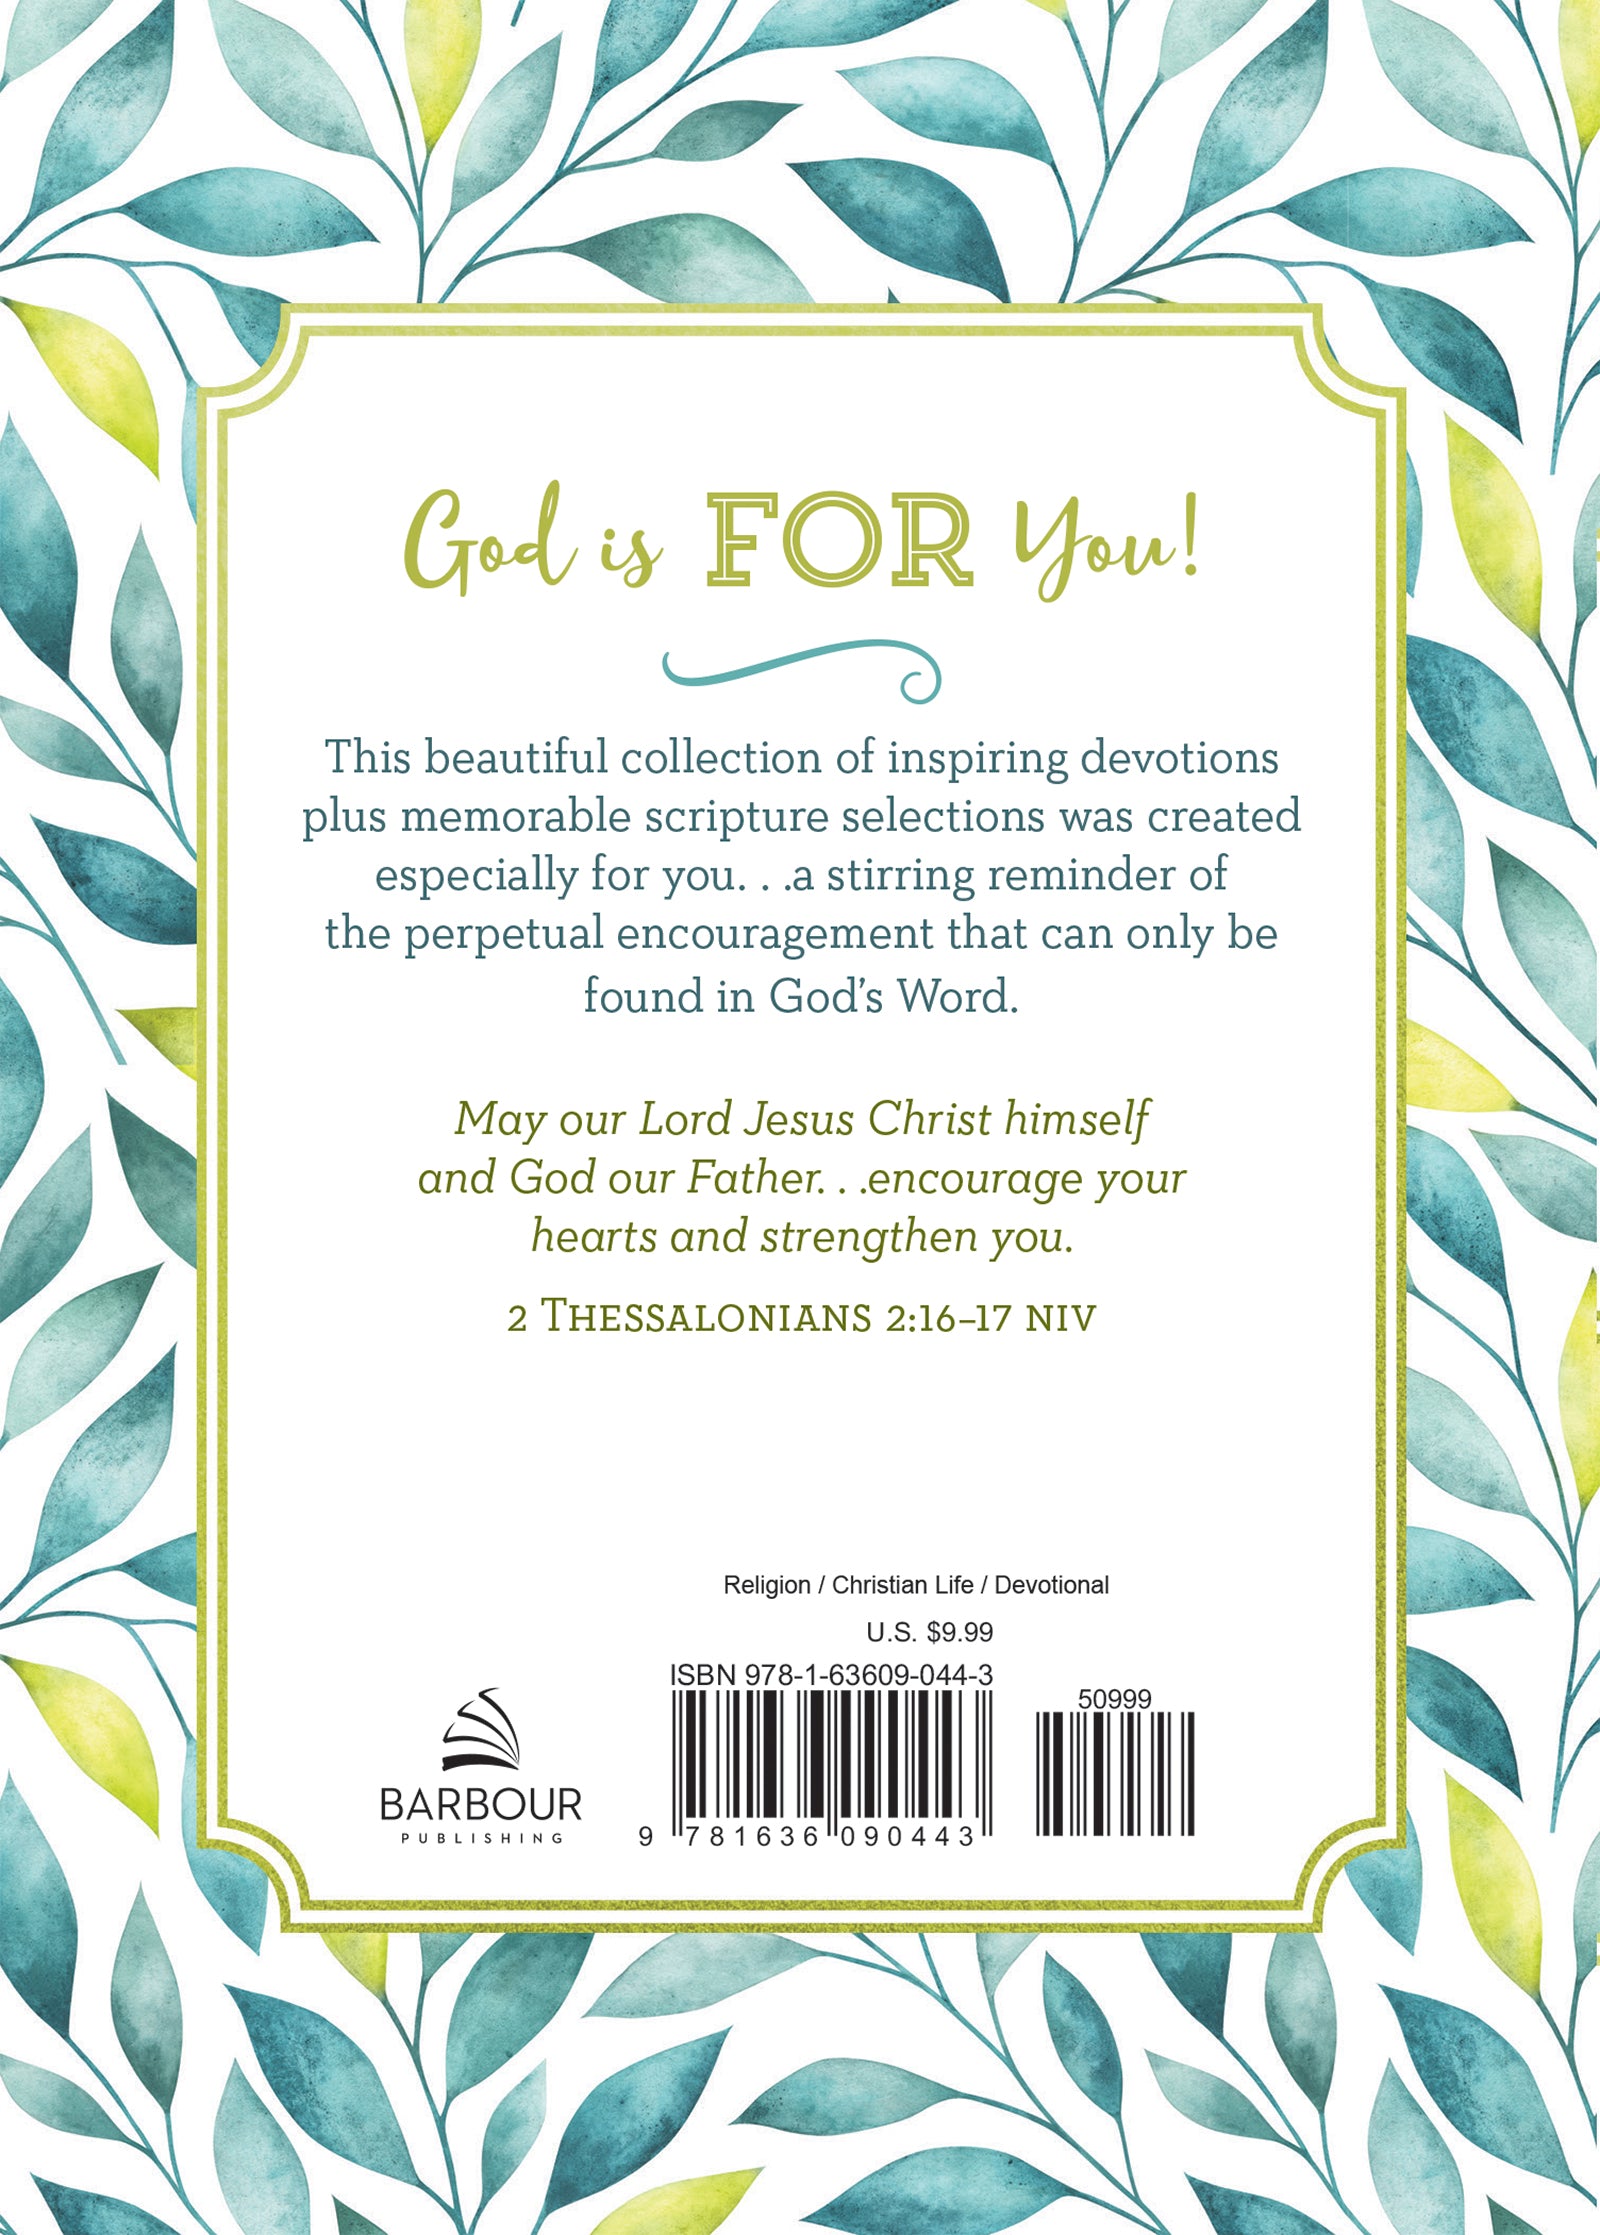 God Is FOR You - The Christian Gift Company